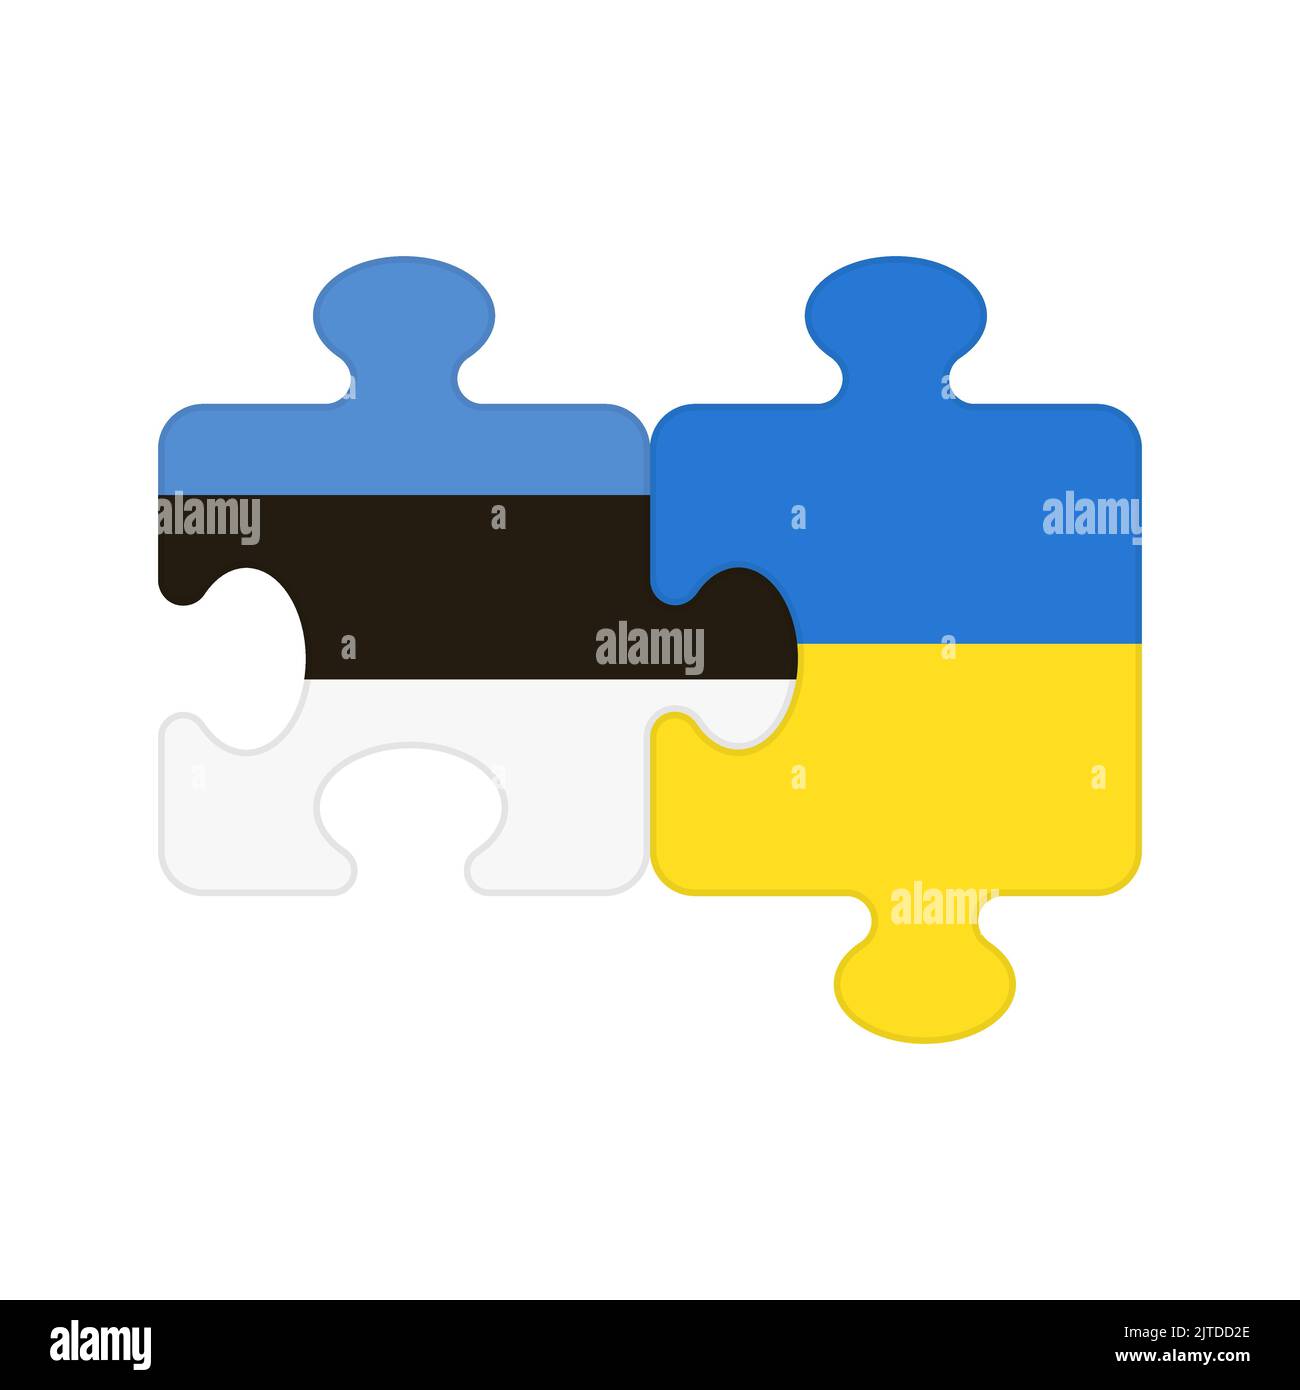 Puzzle pieces with flags of Estonia and Ukraine. Parts with national symbols of European countries joining together in cooperation, friendship and dialogue between two partners Tallinn and Kyiv Stock Vector